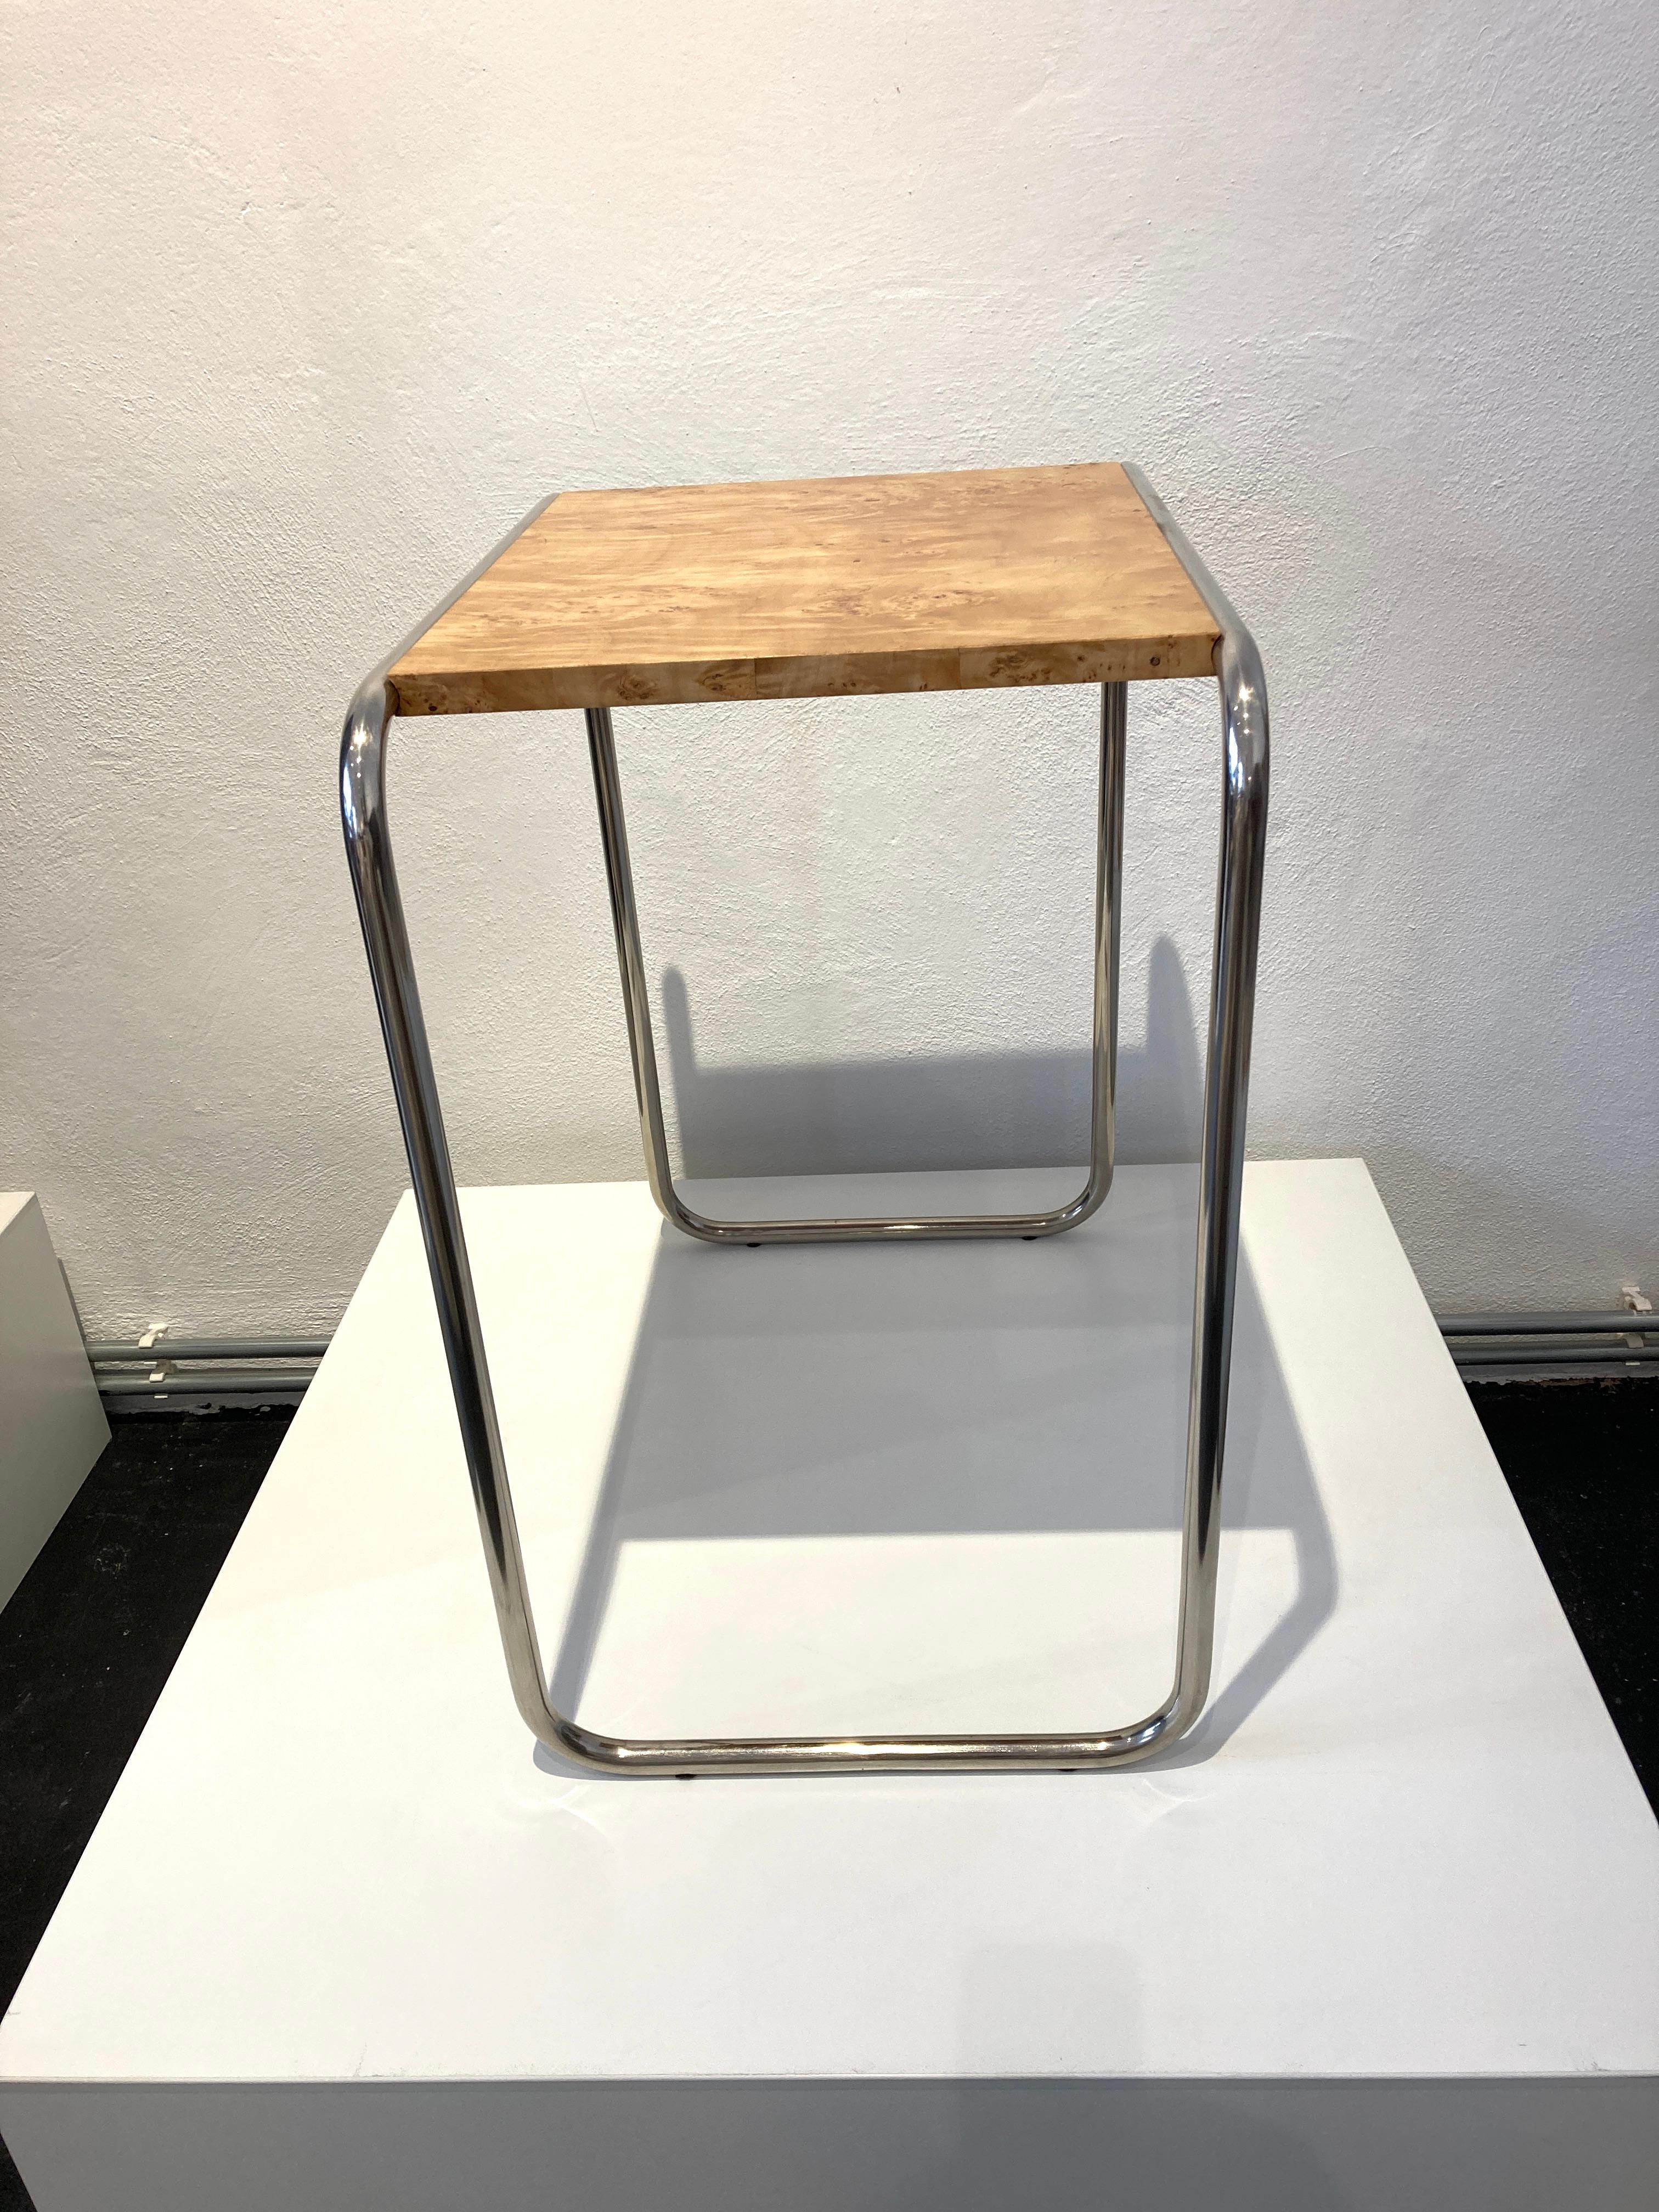 Tubular Steel Table B 9 by Marcel Breuer 1930s In Excellent Condition For Sale In Wien, AT